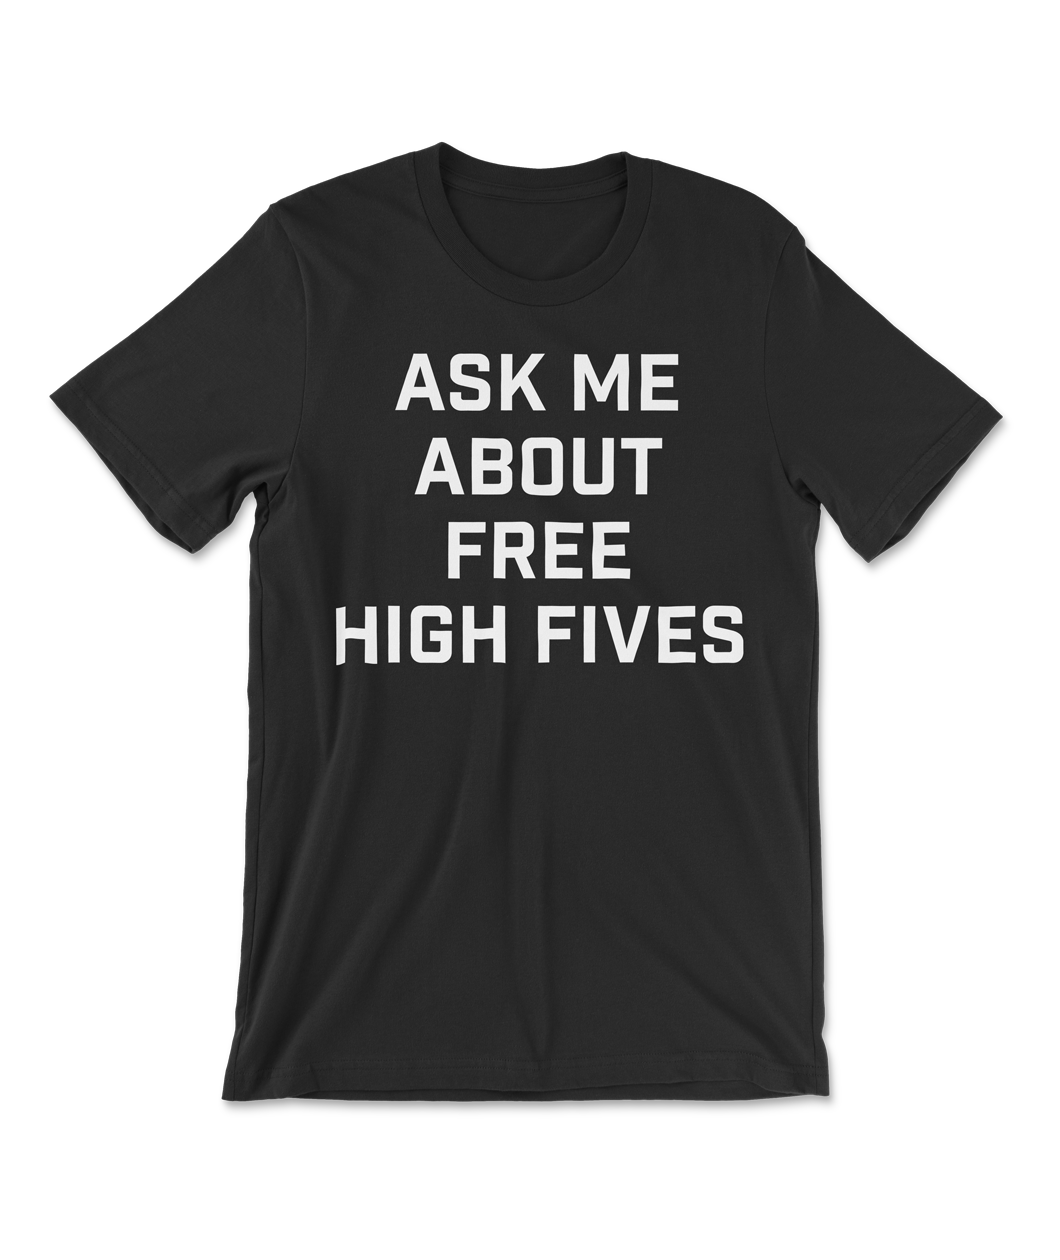 A black t-shirt that says "Ask me about free high fives" in big, white block letters. From Semi Rad.